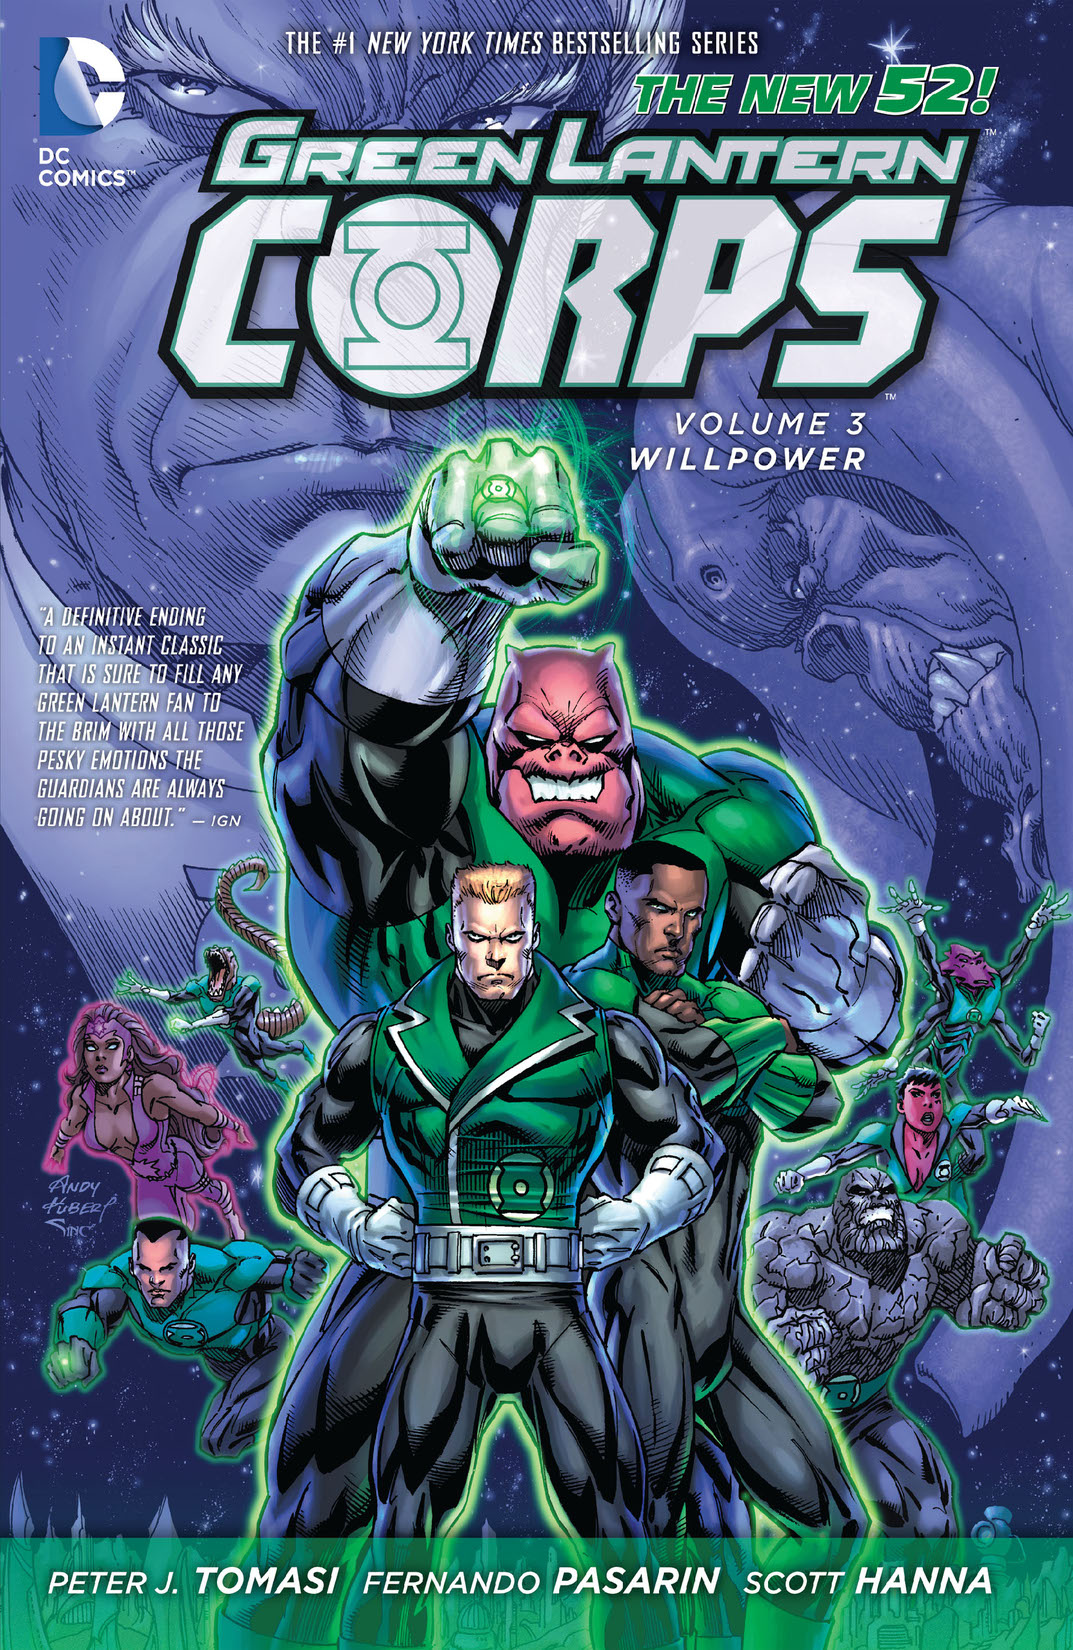 Green Lantern Corps Vol. 3: Willpower preview images